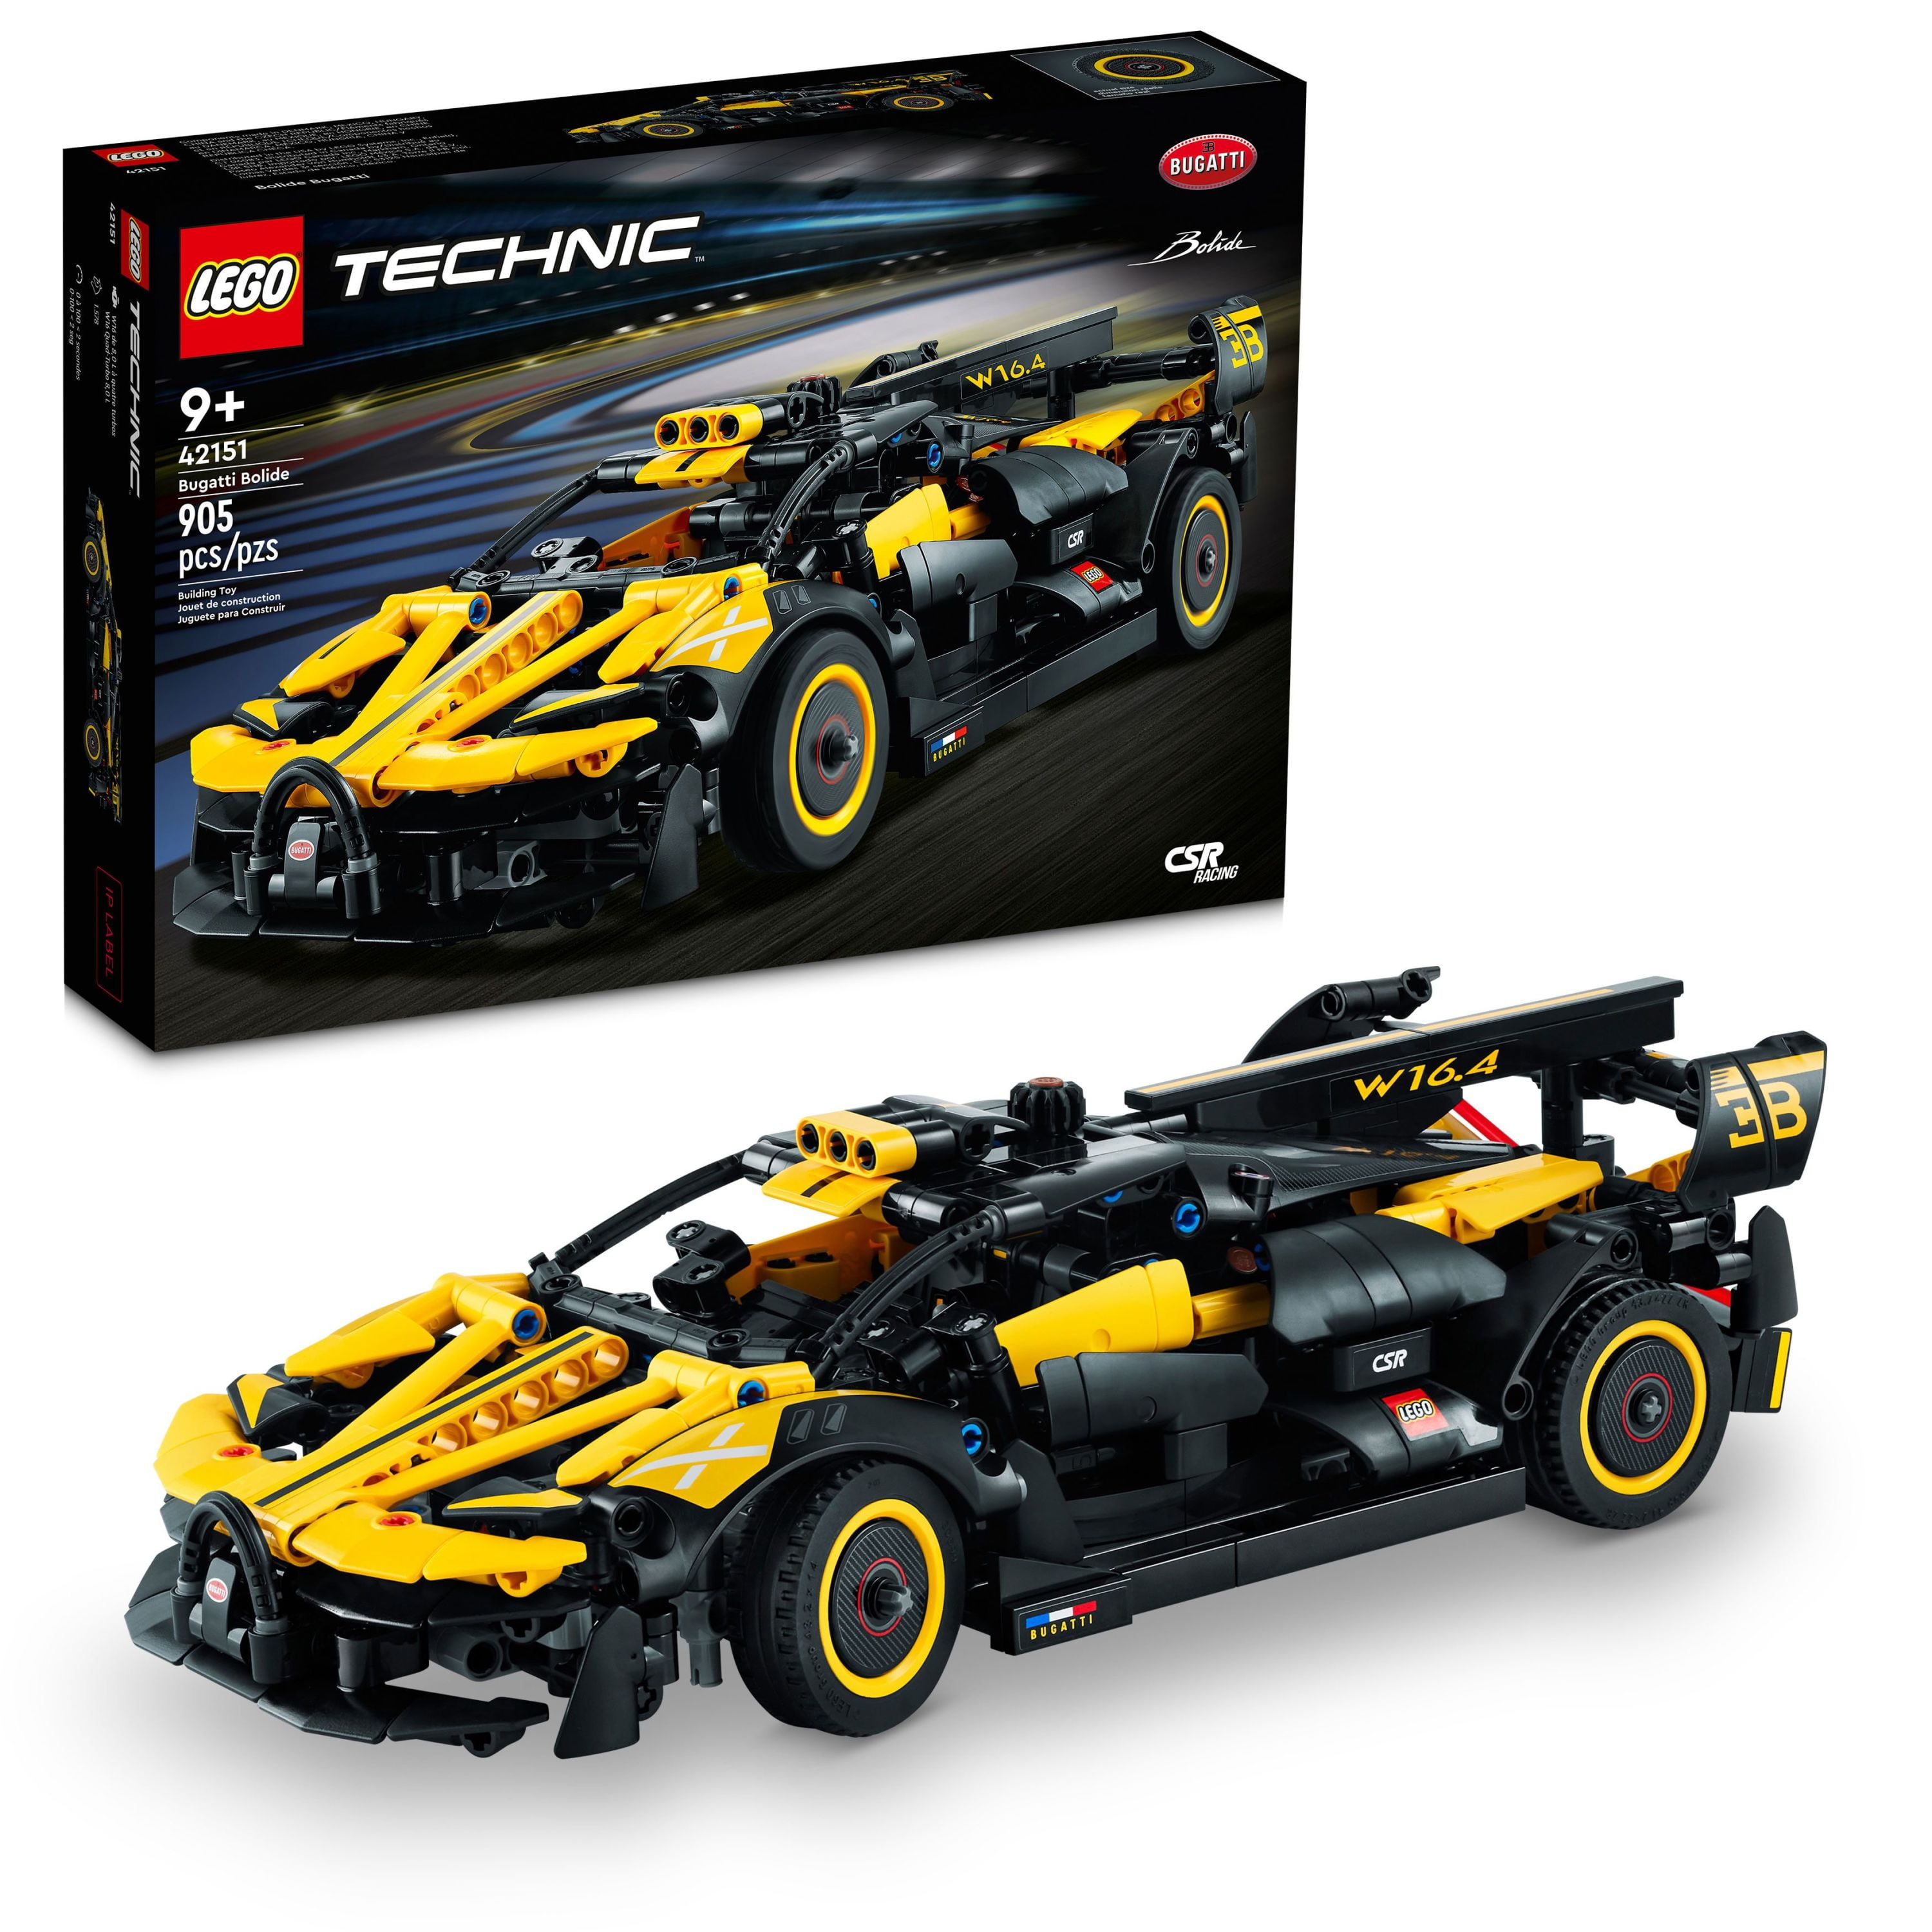 LEGO Technic Bugatti Bolide Racing Building Set 42151 - Model and Race Engineering Toy for Back to School, Collectible Sports Car Construction Kit for Boys, Girls, and Teen Builders Ages 9+ - Walmart.com